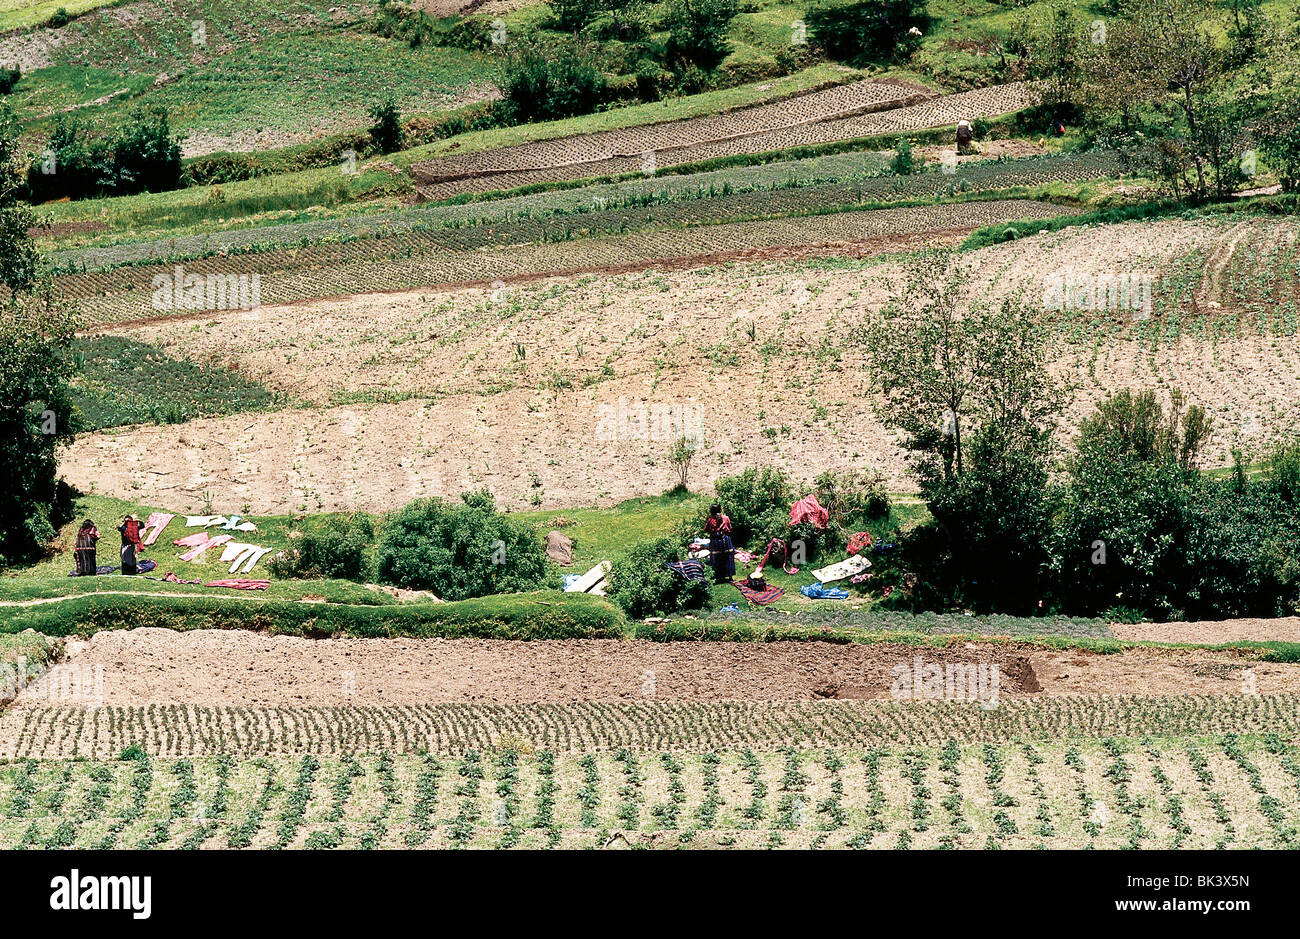 Agricultural fields with women drying laundry in the middle foreground, Guatemala Stock Photo